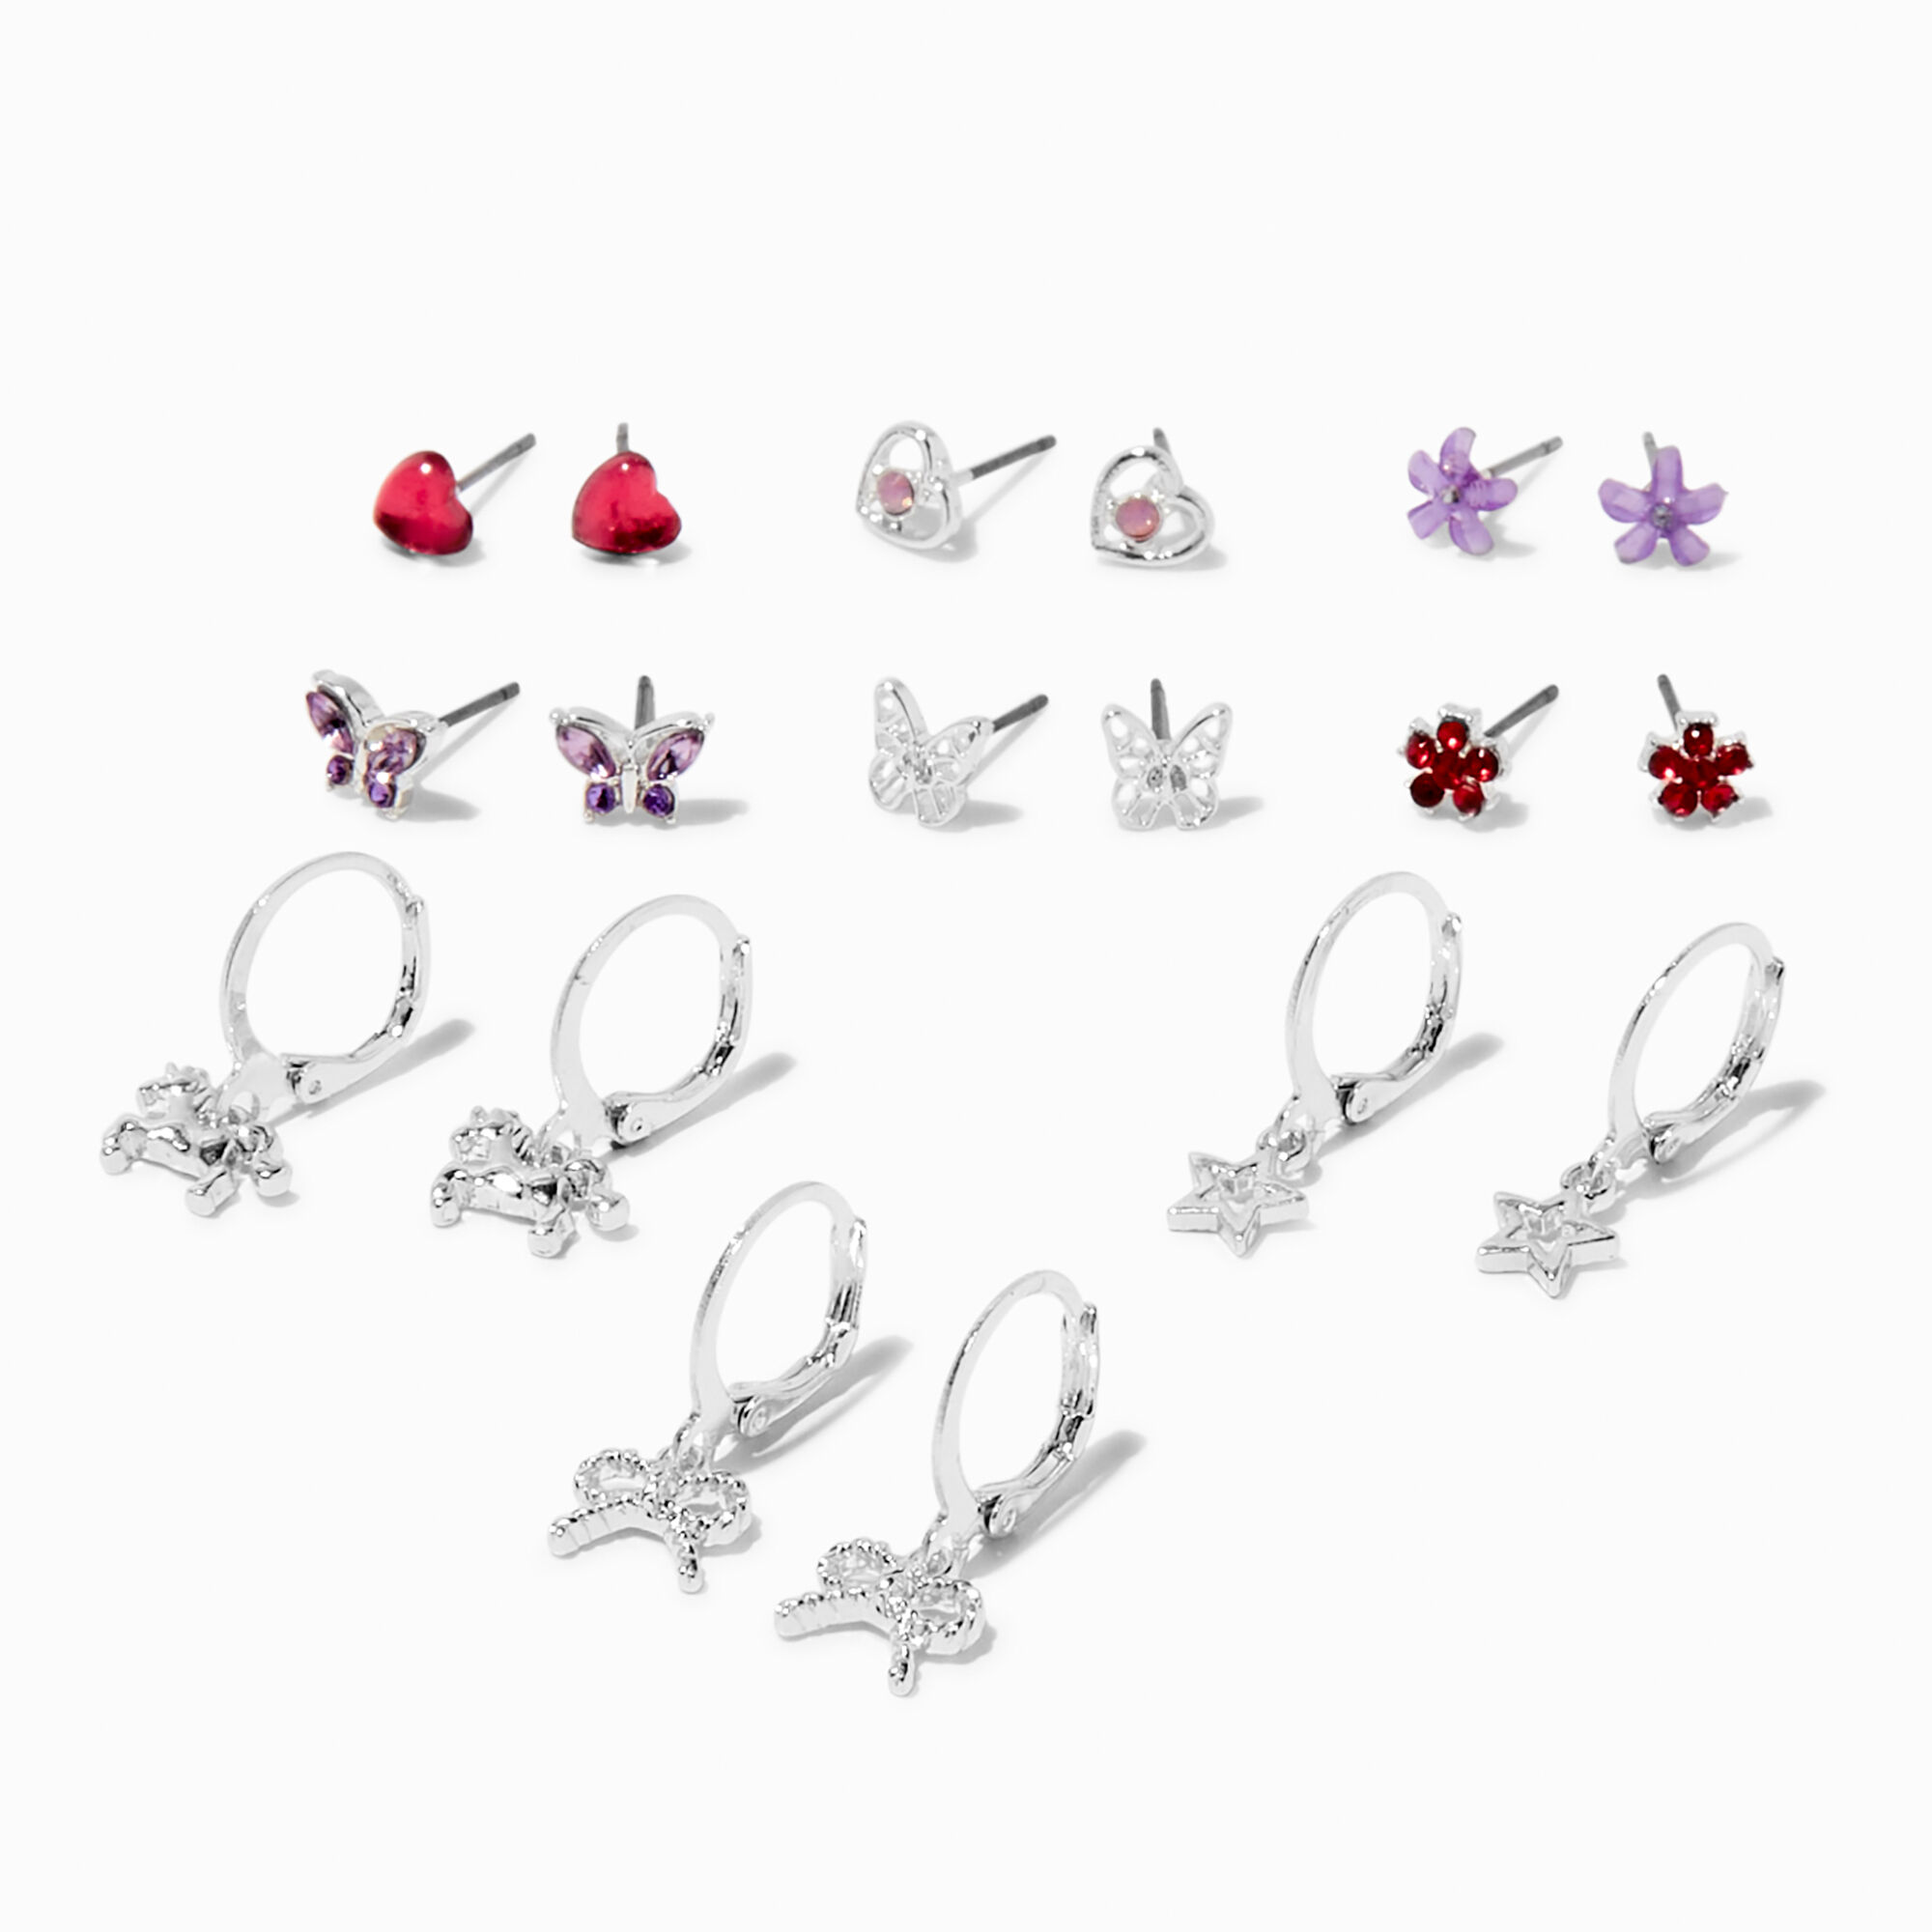 View Claires Tone Butterflies Flowers Mixed Earring Set 9 Pack Silver information